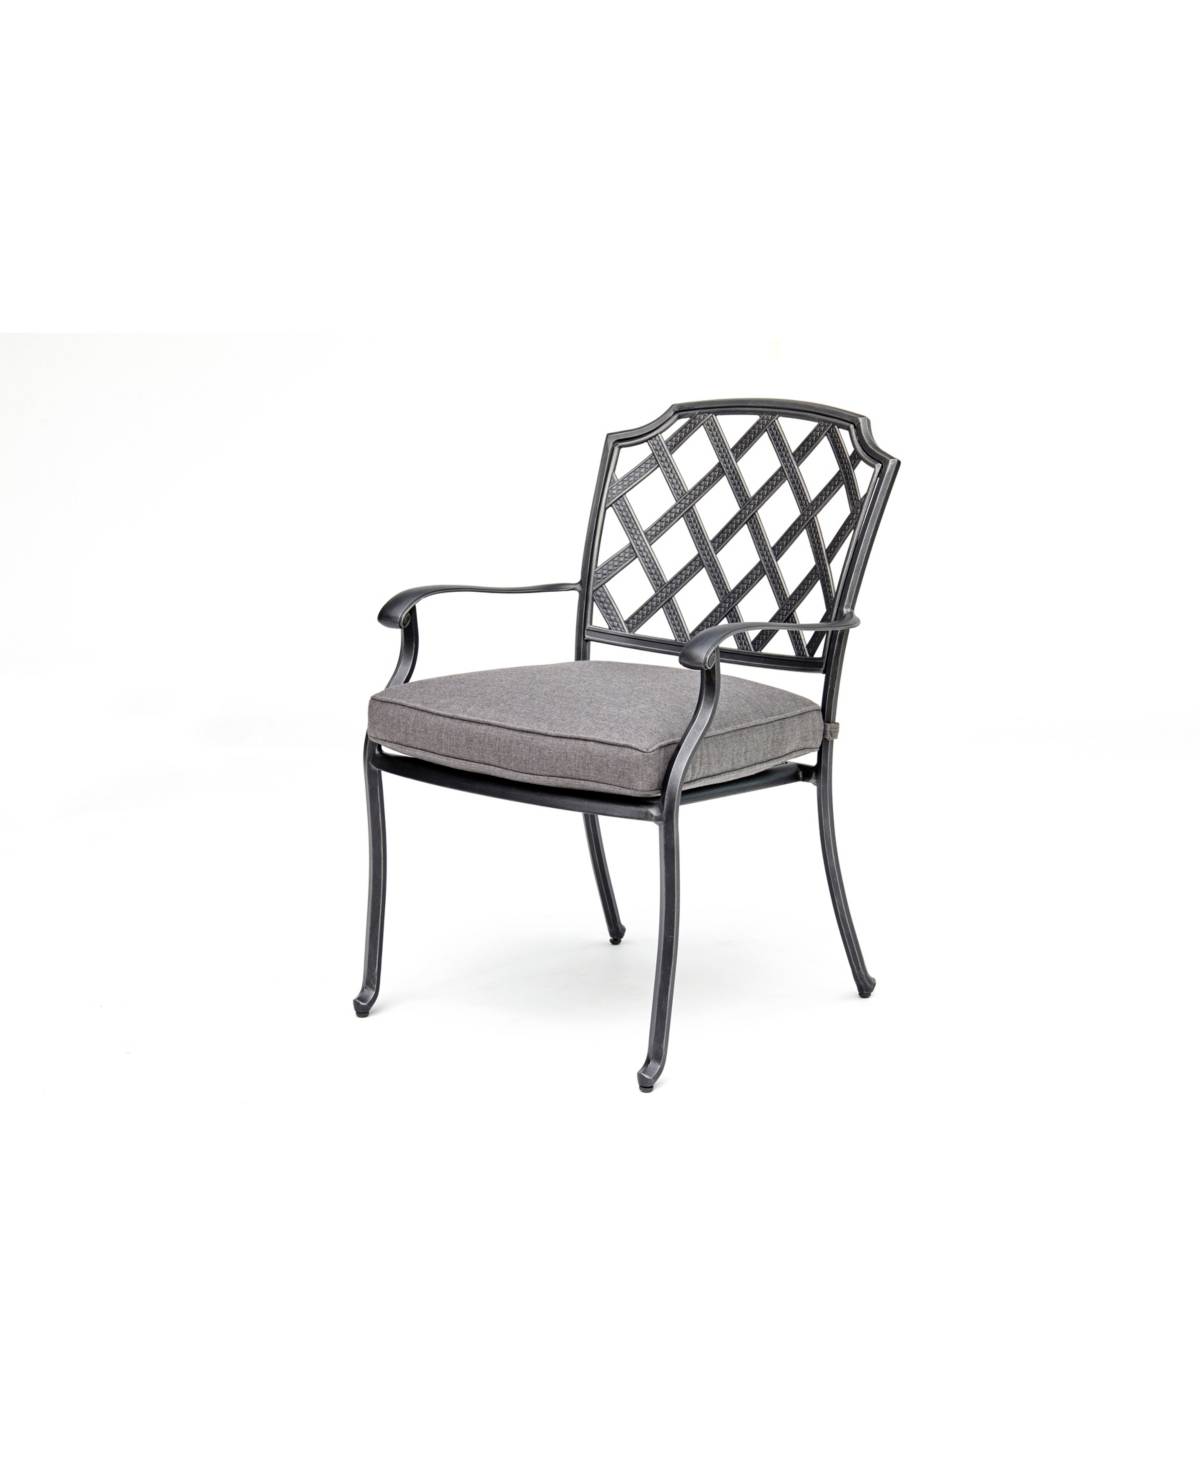 Agio Vintage Ii Set Of 2 Outdoor Dining Chair With Outdura Cushions, Created For Macy's In Outdura Remy Graphite